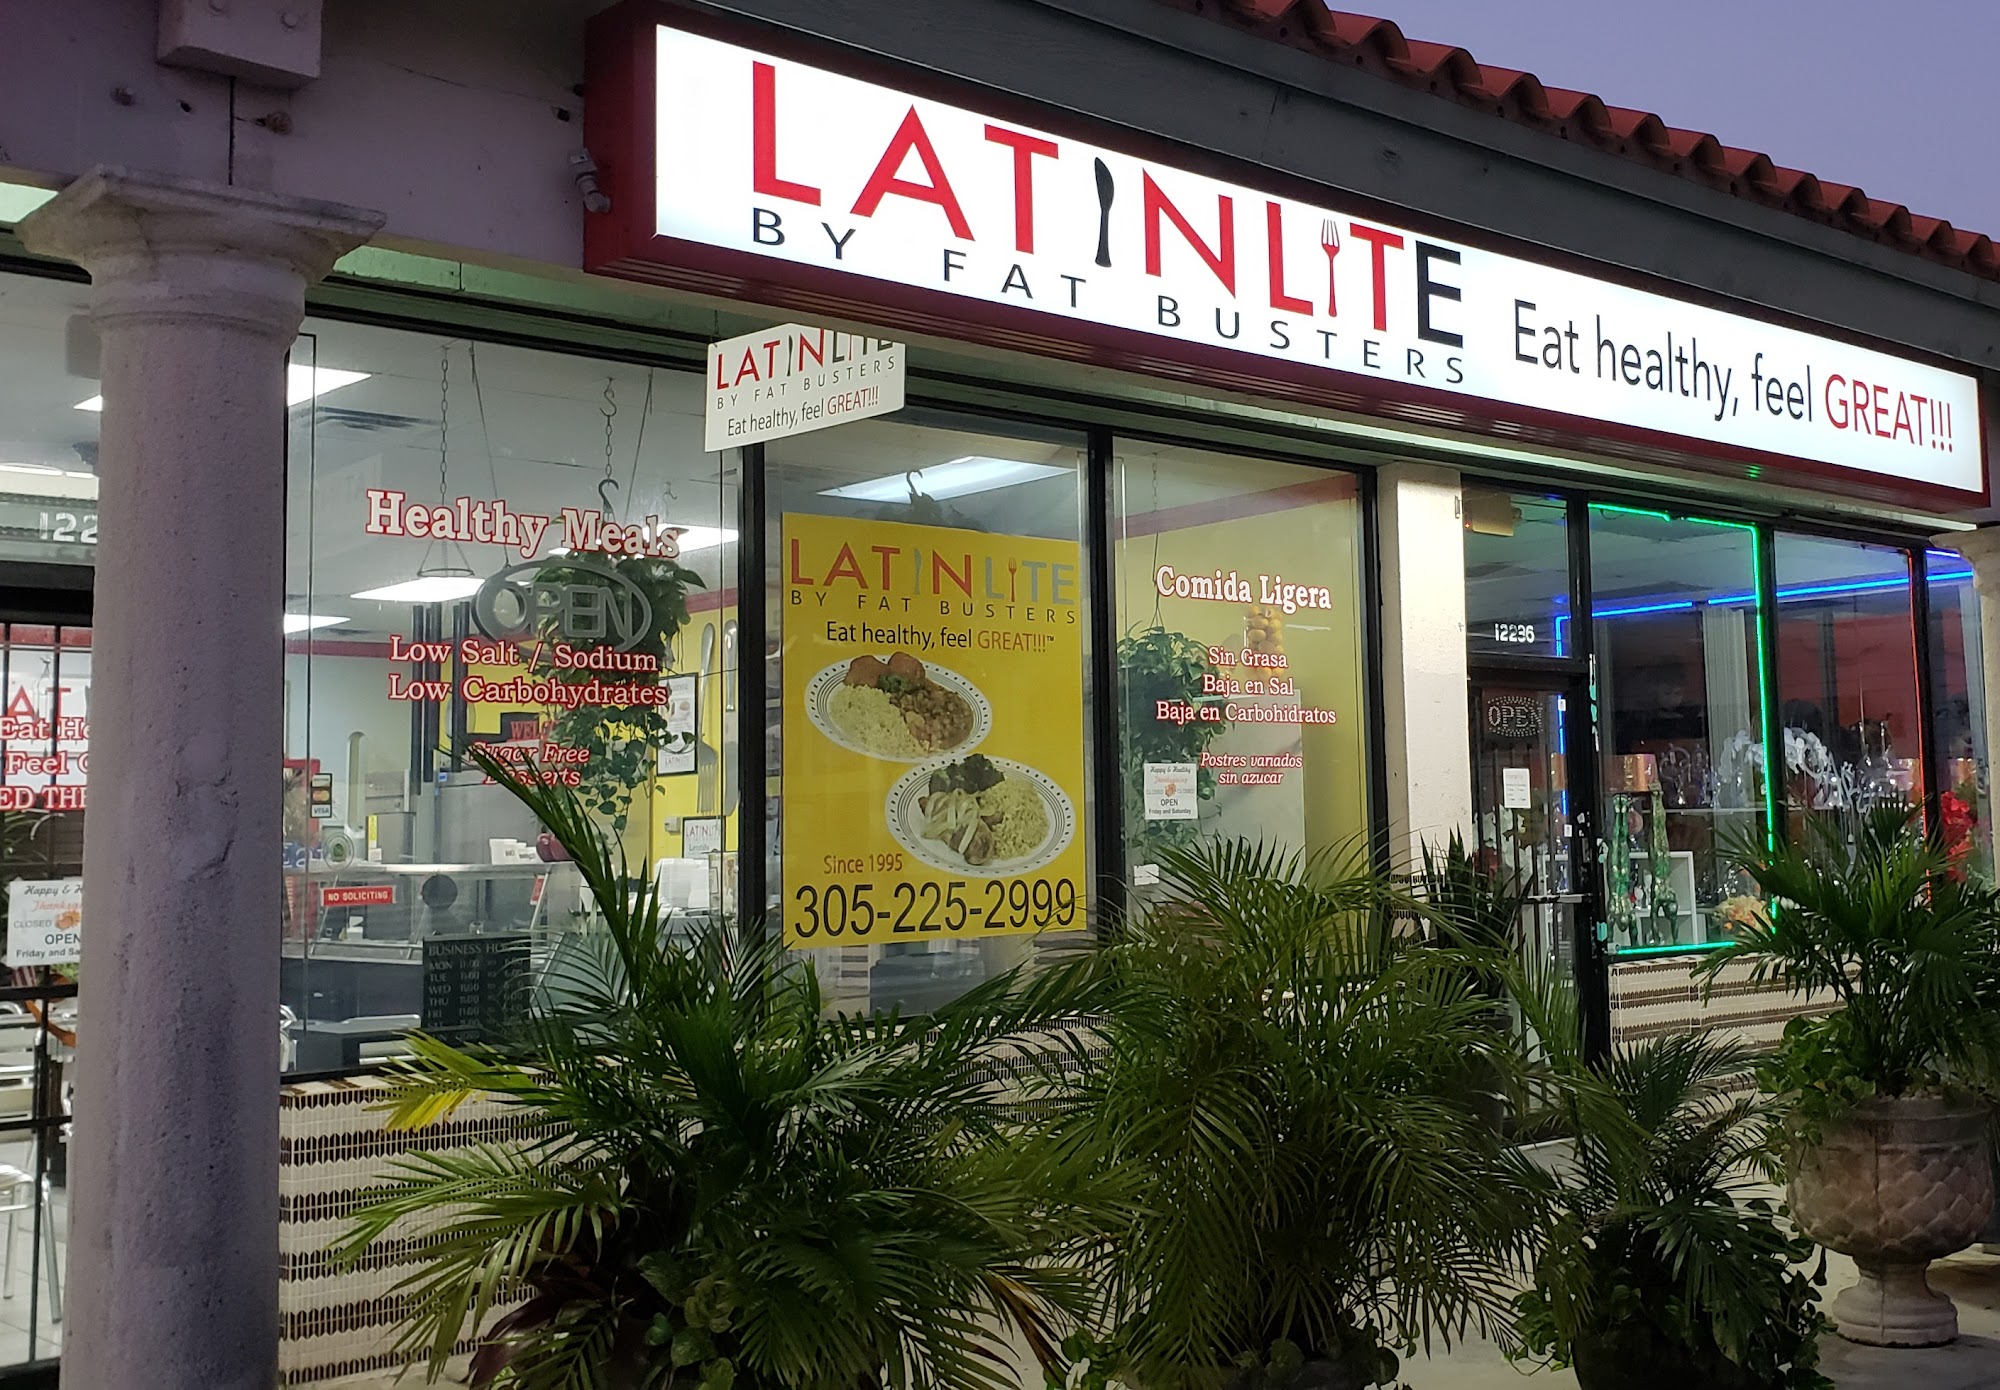 Latinlite by Fat Busters